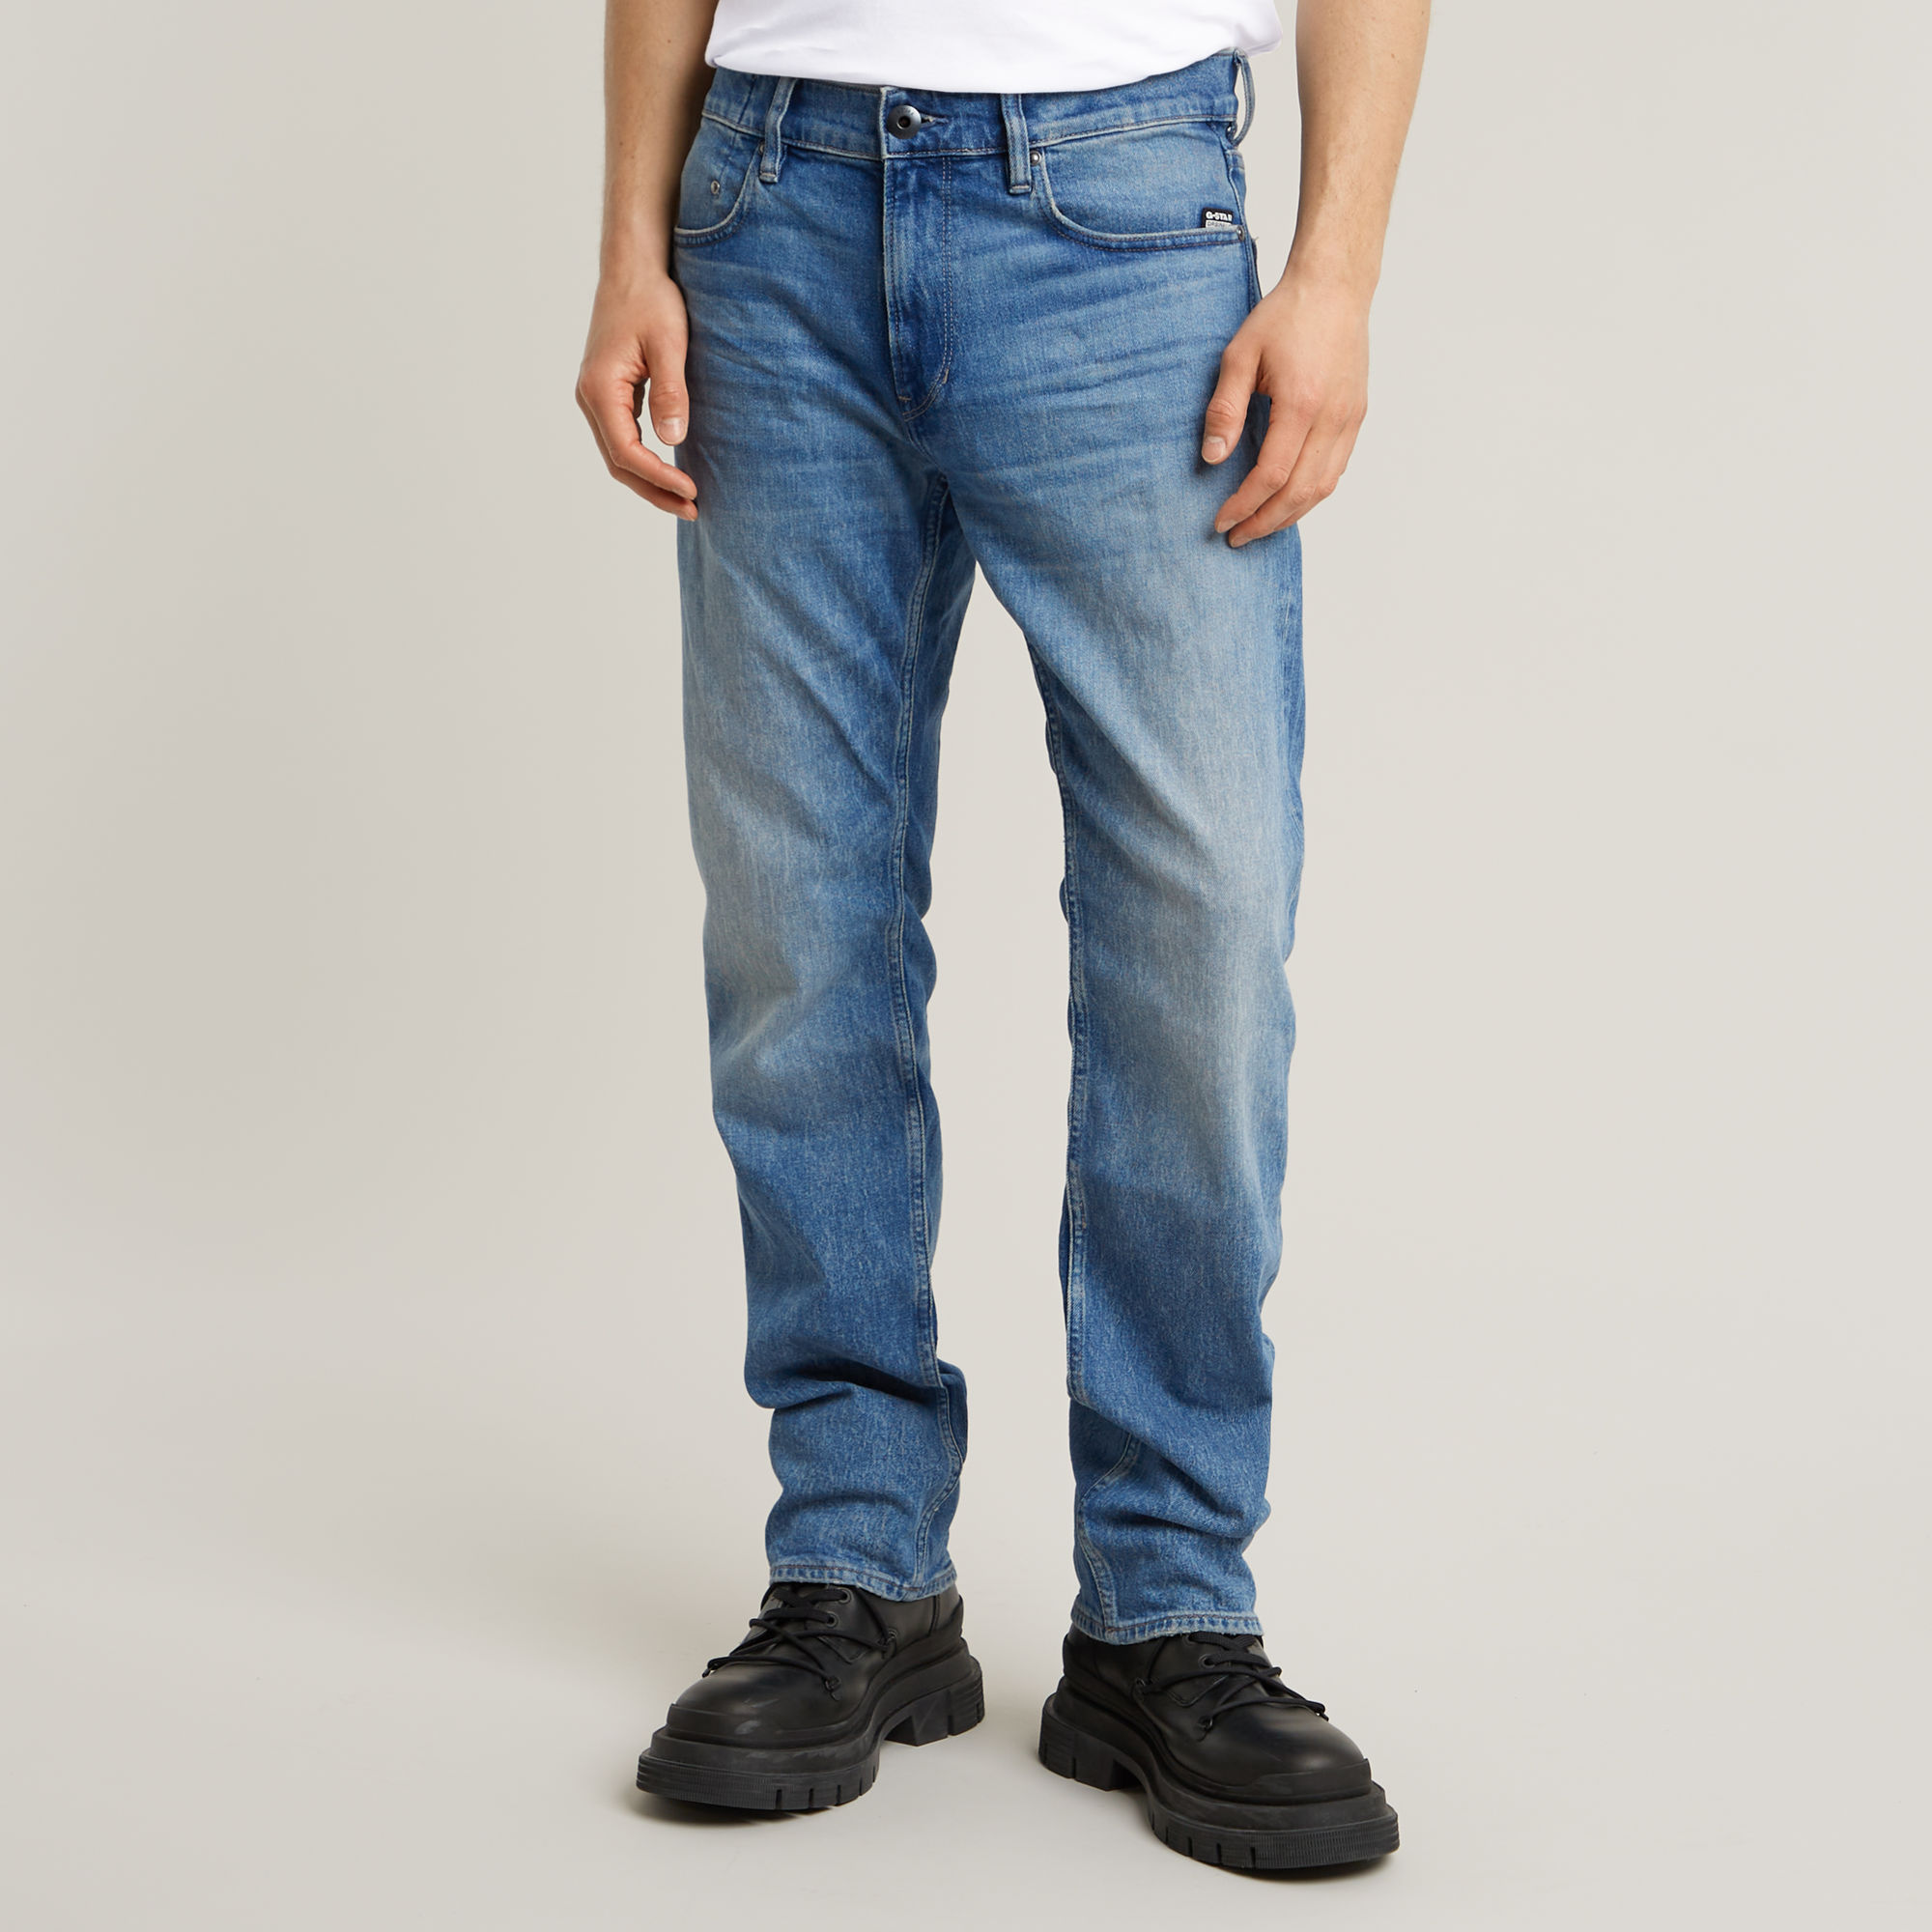 G-Star Raw Straight fit jeans met labelpatch model 'Mosa'